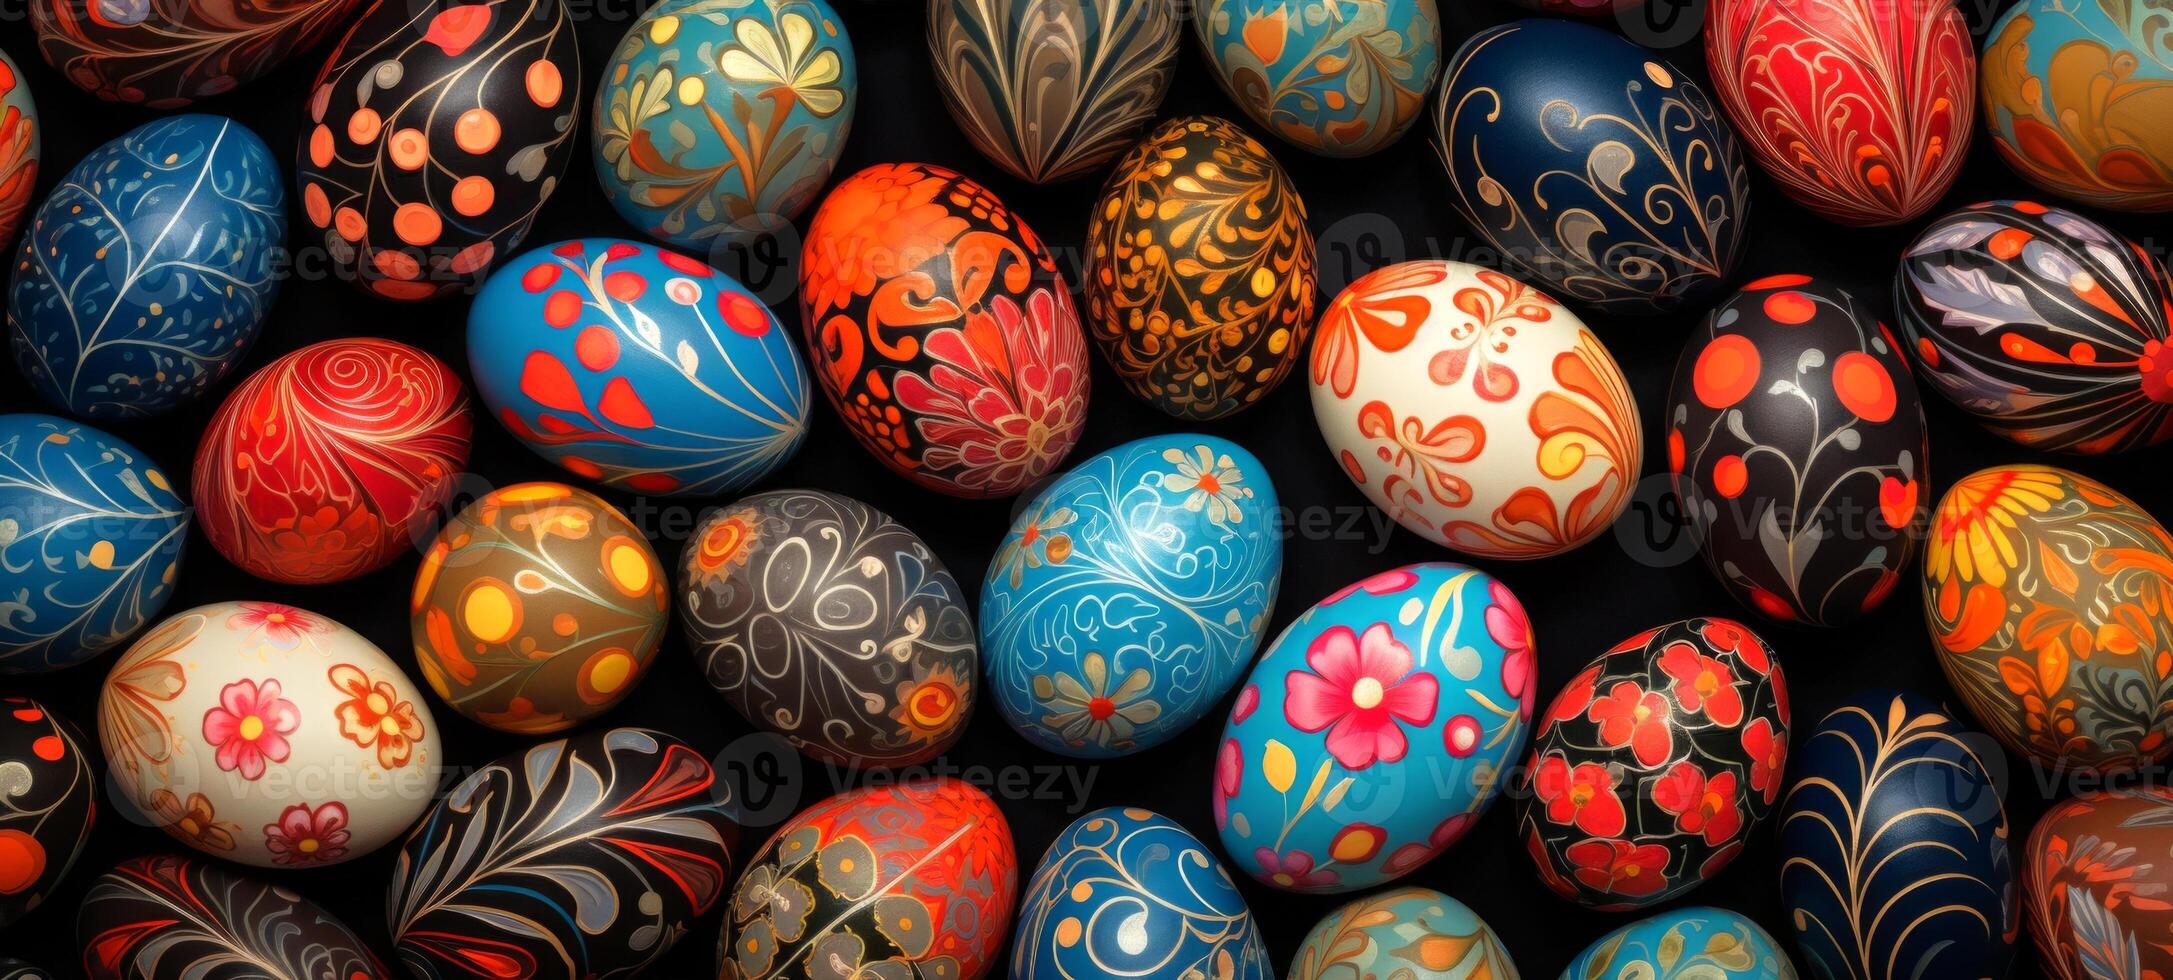 AI generated Easter eggs with floral and abstract patterns displayed against black backdrop. Ideal for festive content, event invitations, promotional material for spring season. Top view. Background photo